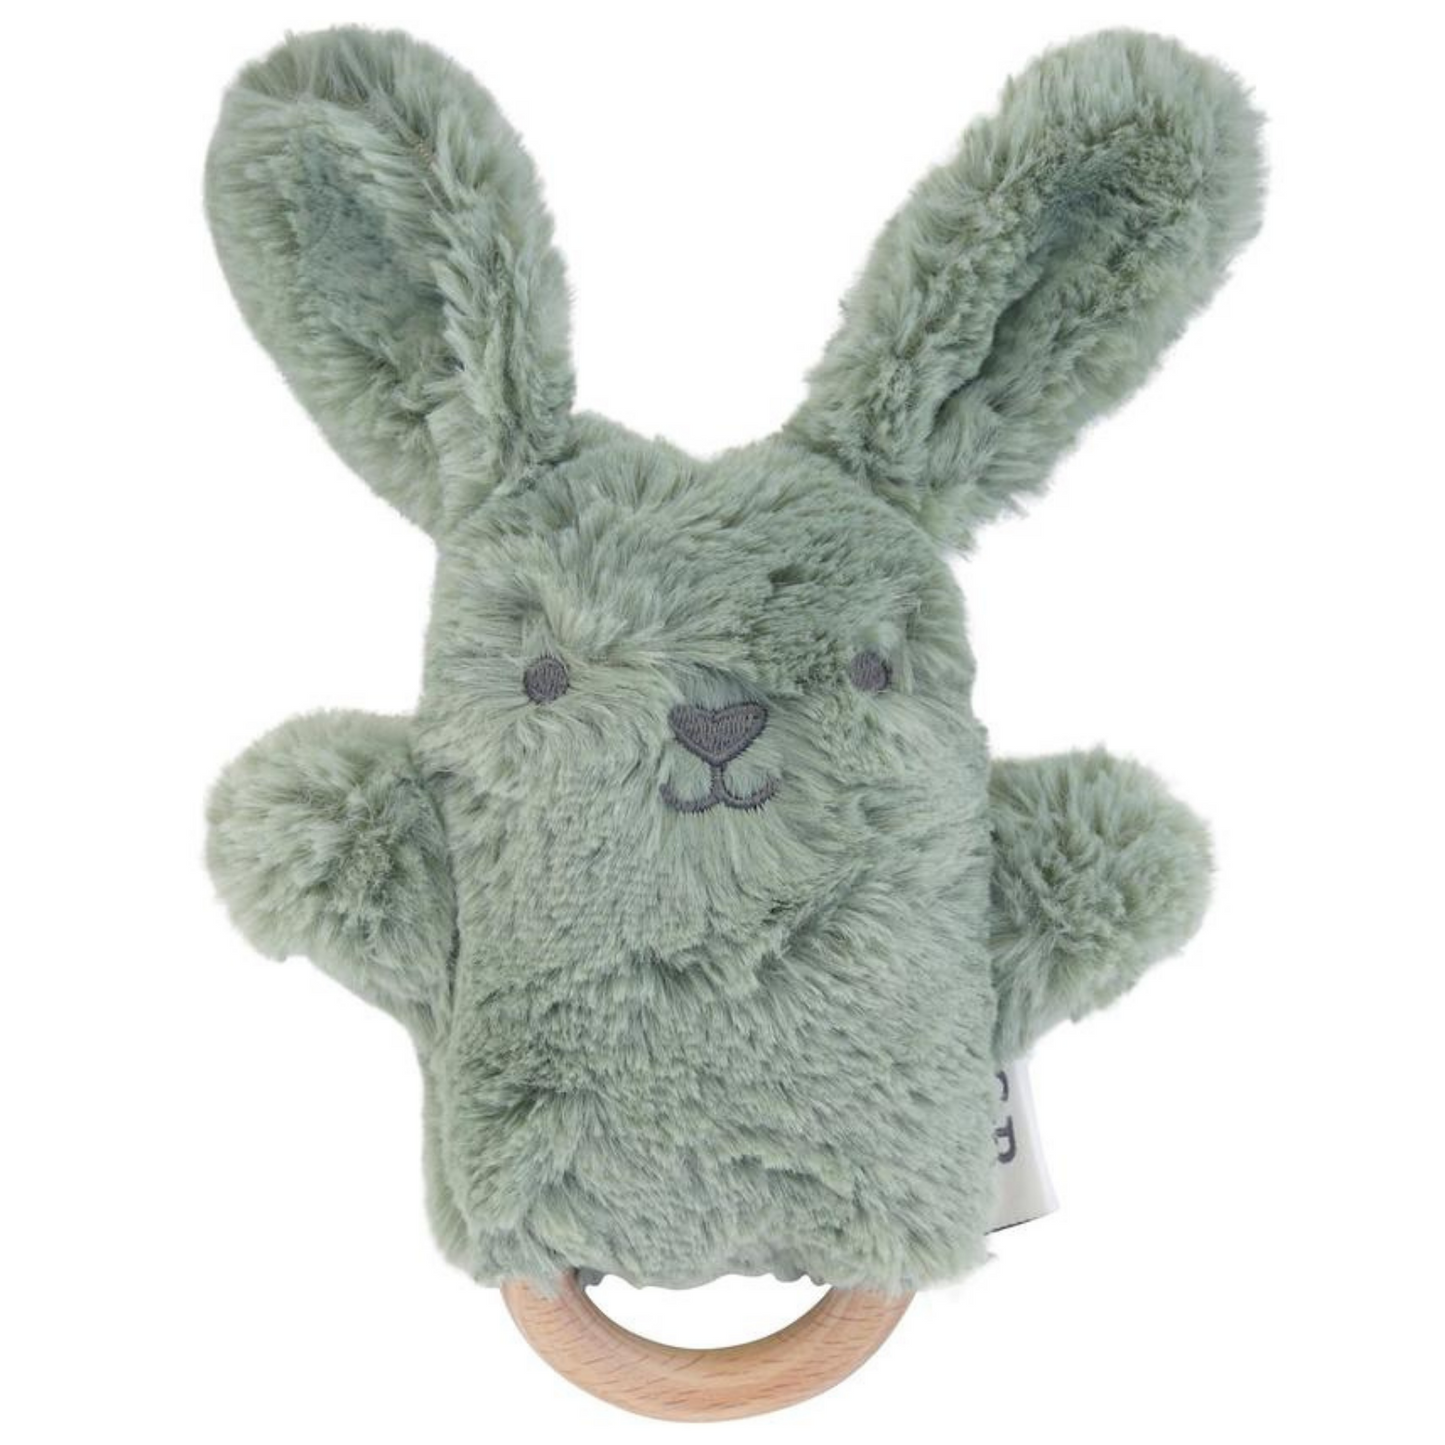 Beau Bunny Rattle Teether Toy